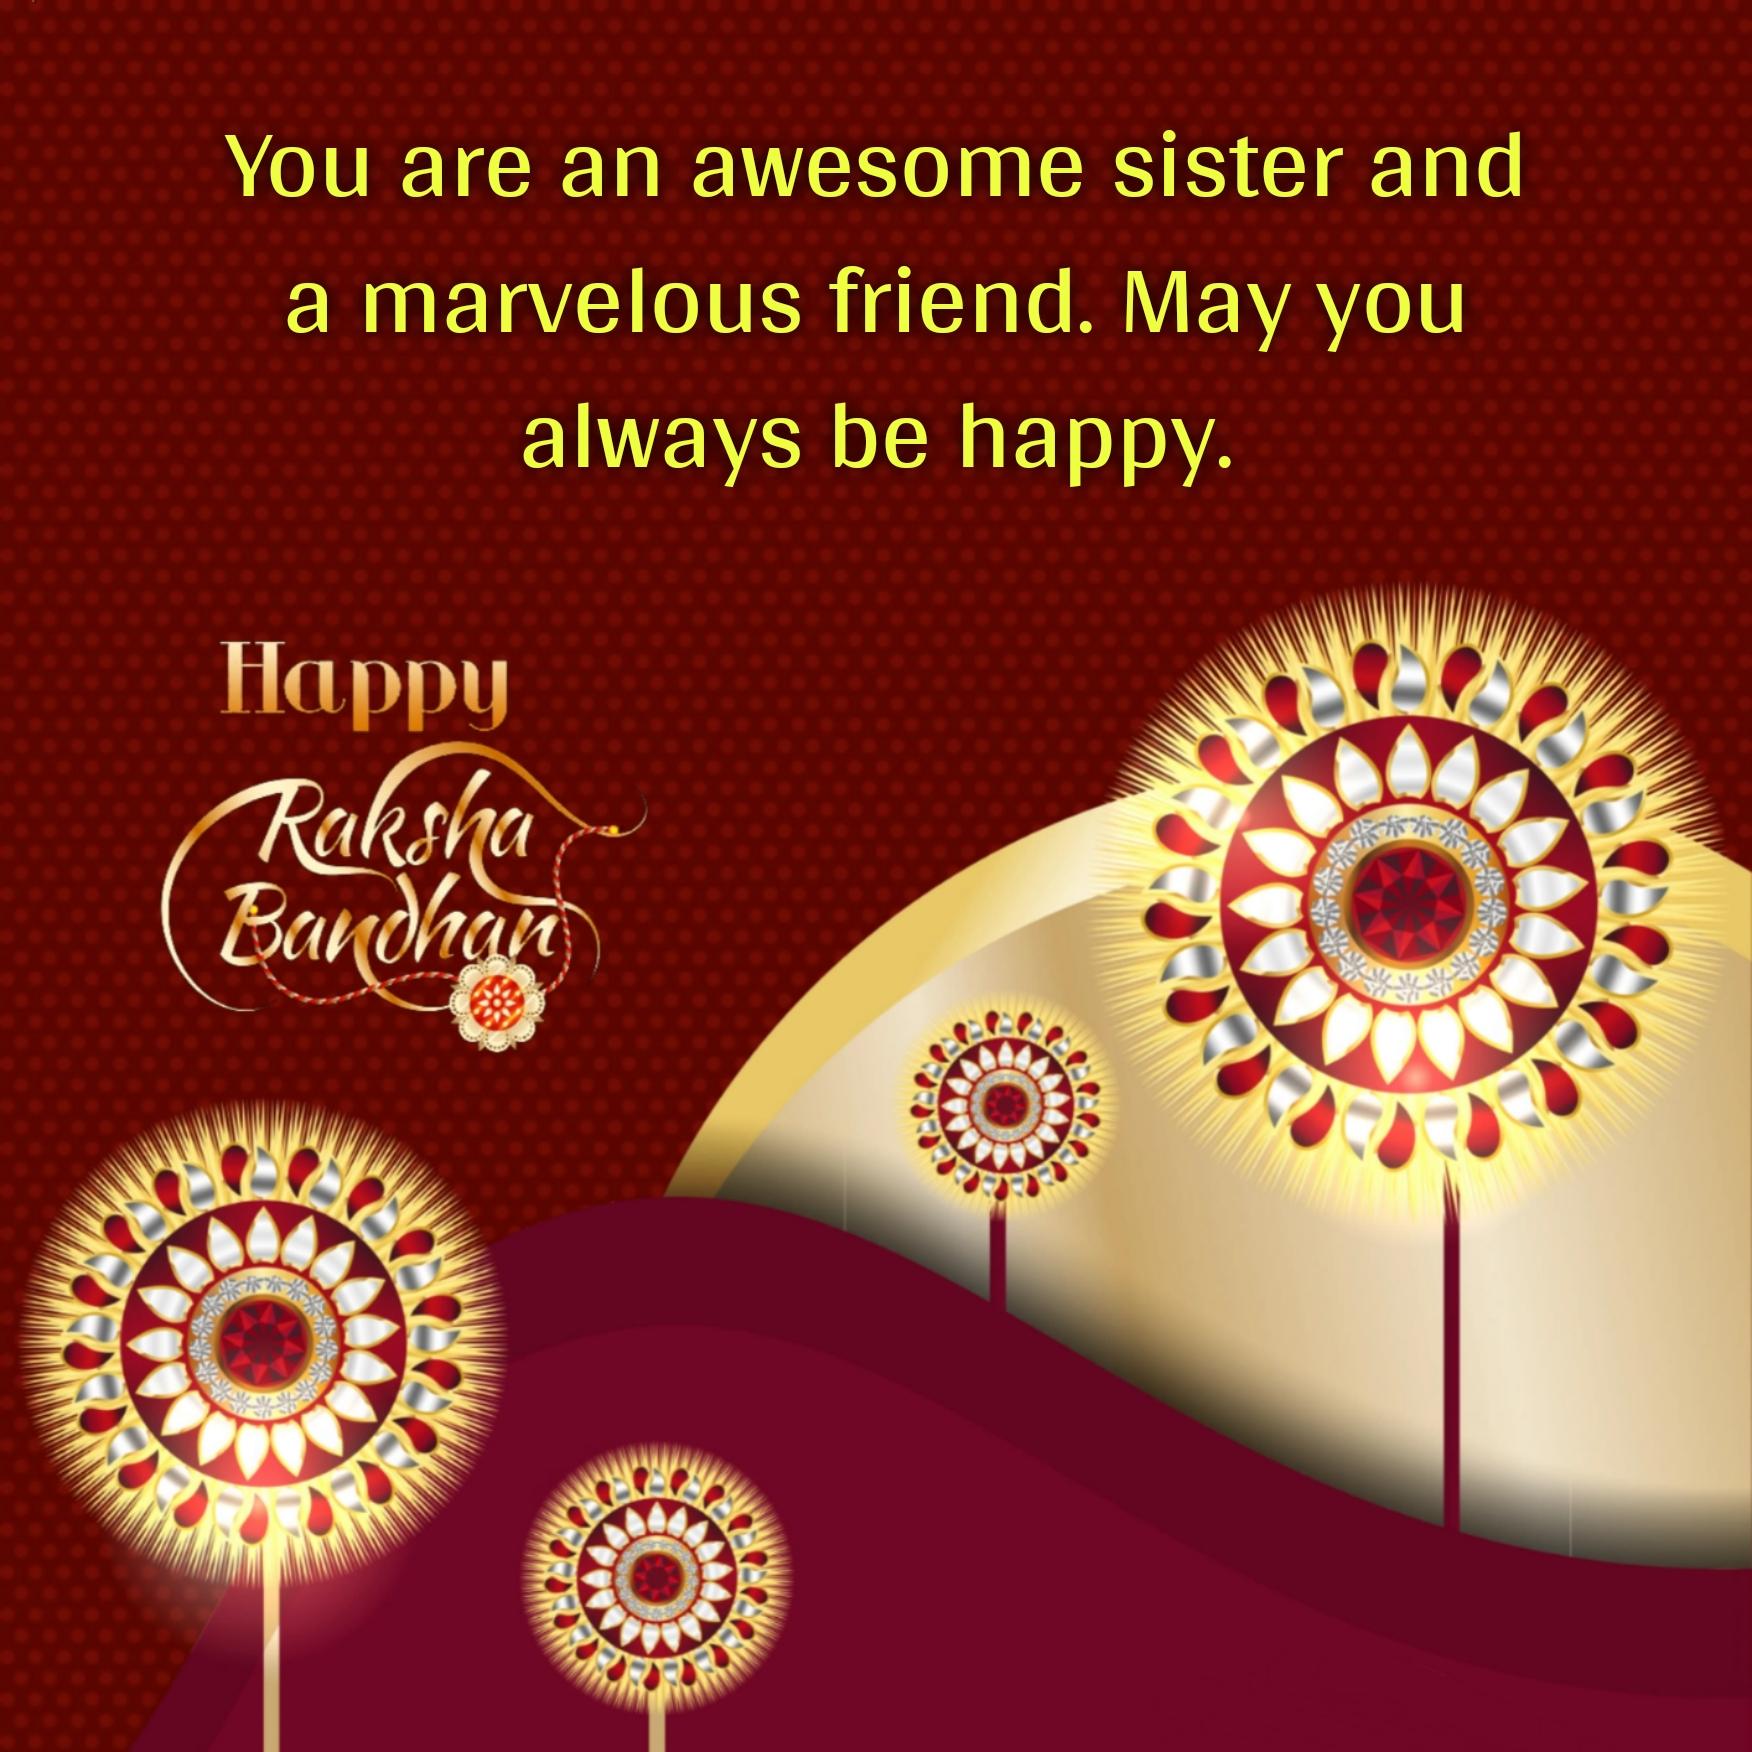 You are an awesome sister and a marvelous friend